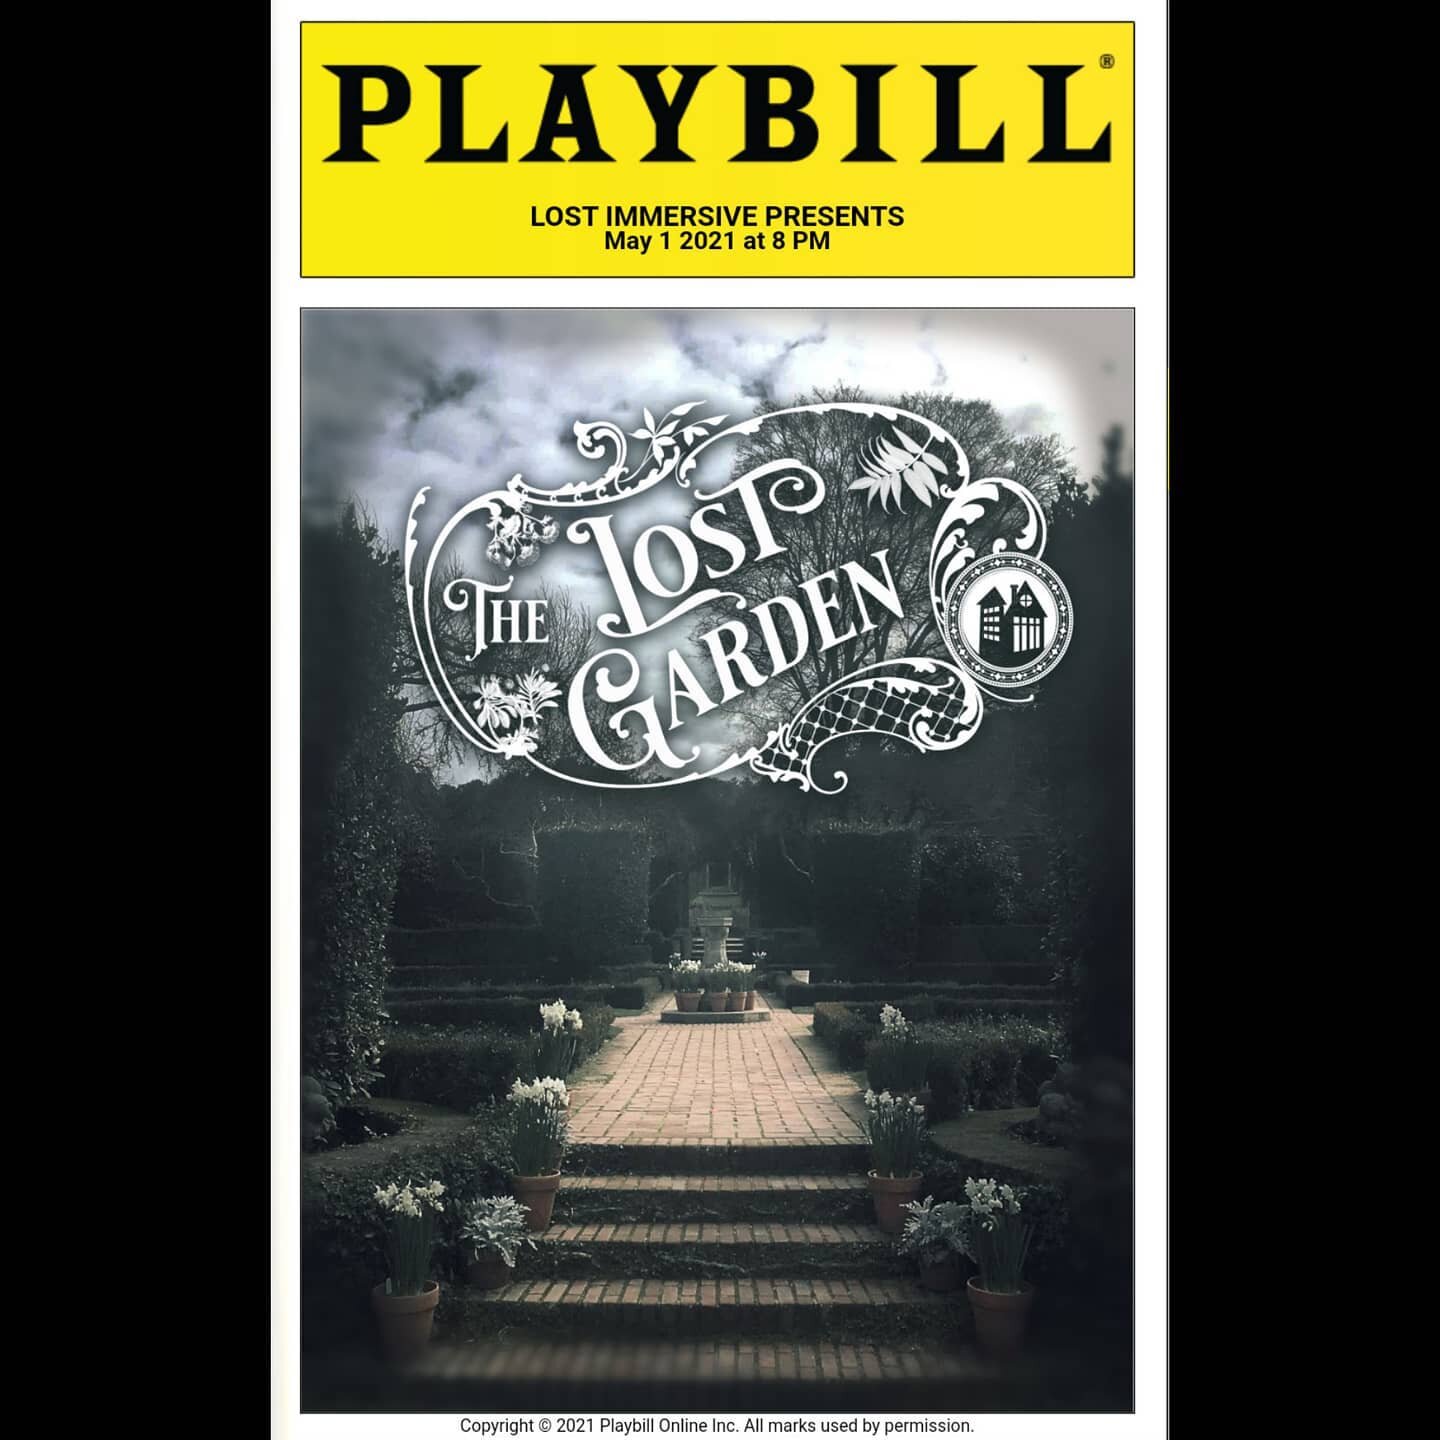 Head to Lostimmersive.com and find the link on our front page to view the entire playbill! Make sure to follow your favorite performers and artists to see what they are up to next!

#lostimmersive #lostgarden #playbill #NYC #nyctheater #immersivethea